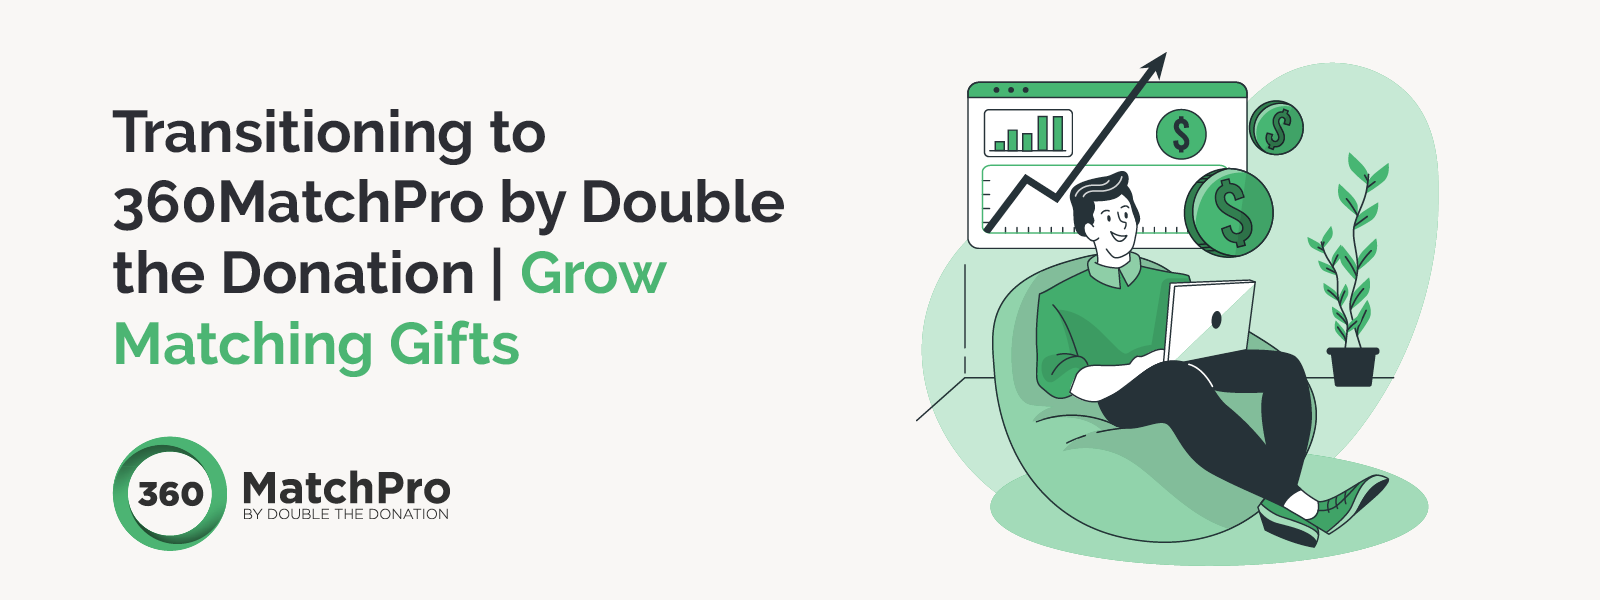 Matching Gifts: The Basics + Growing Revenue with Automation - 360MatchPro